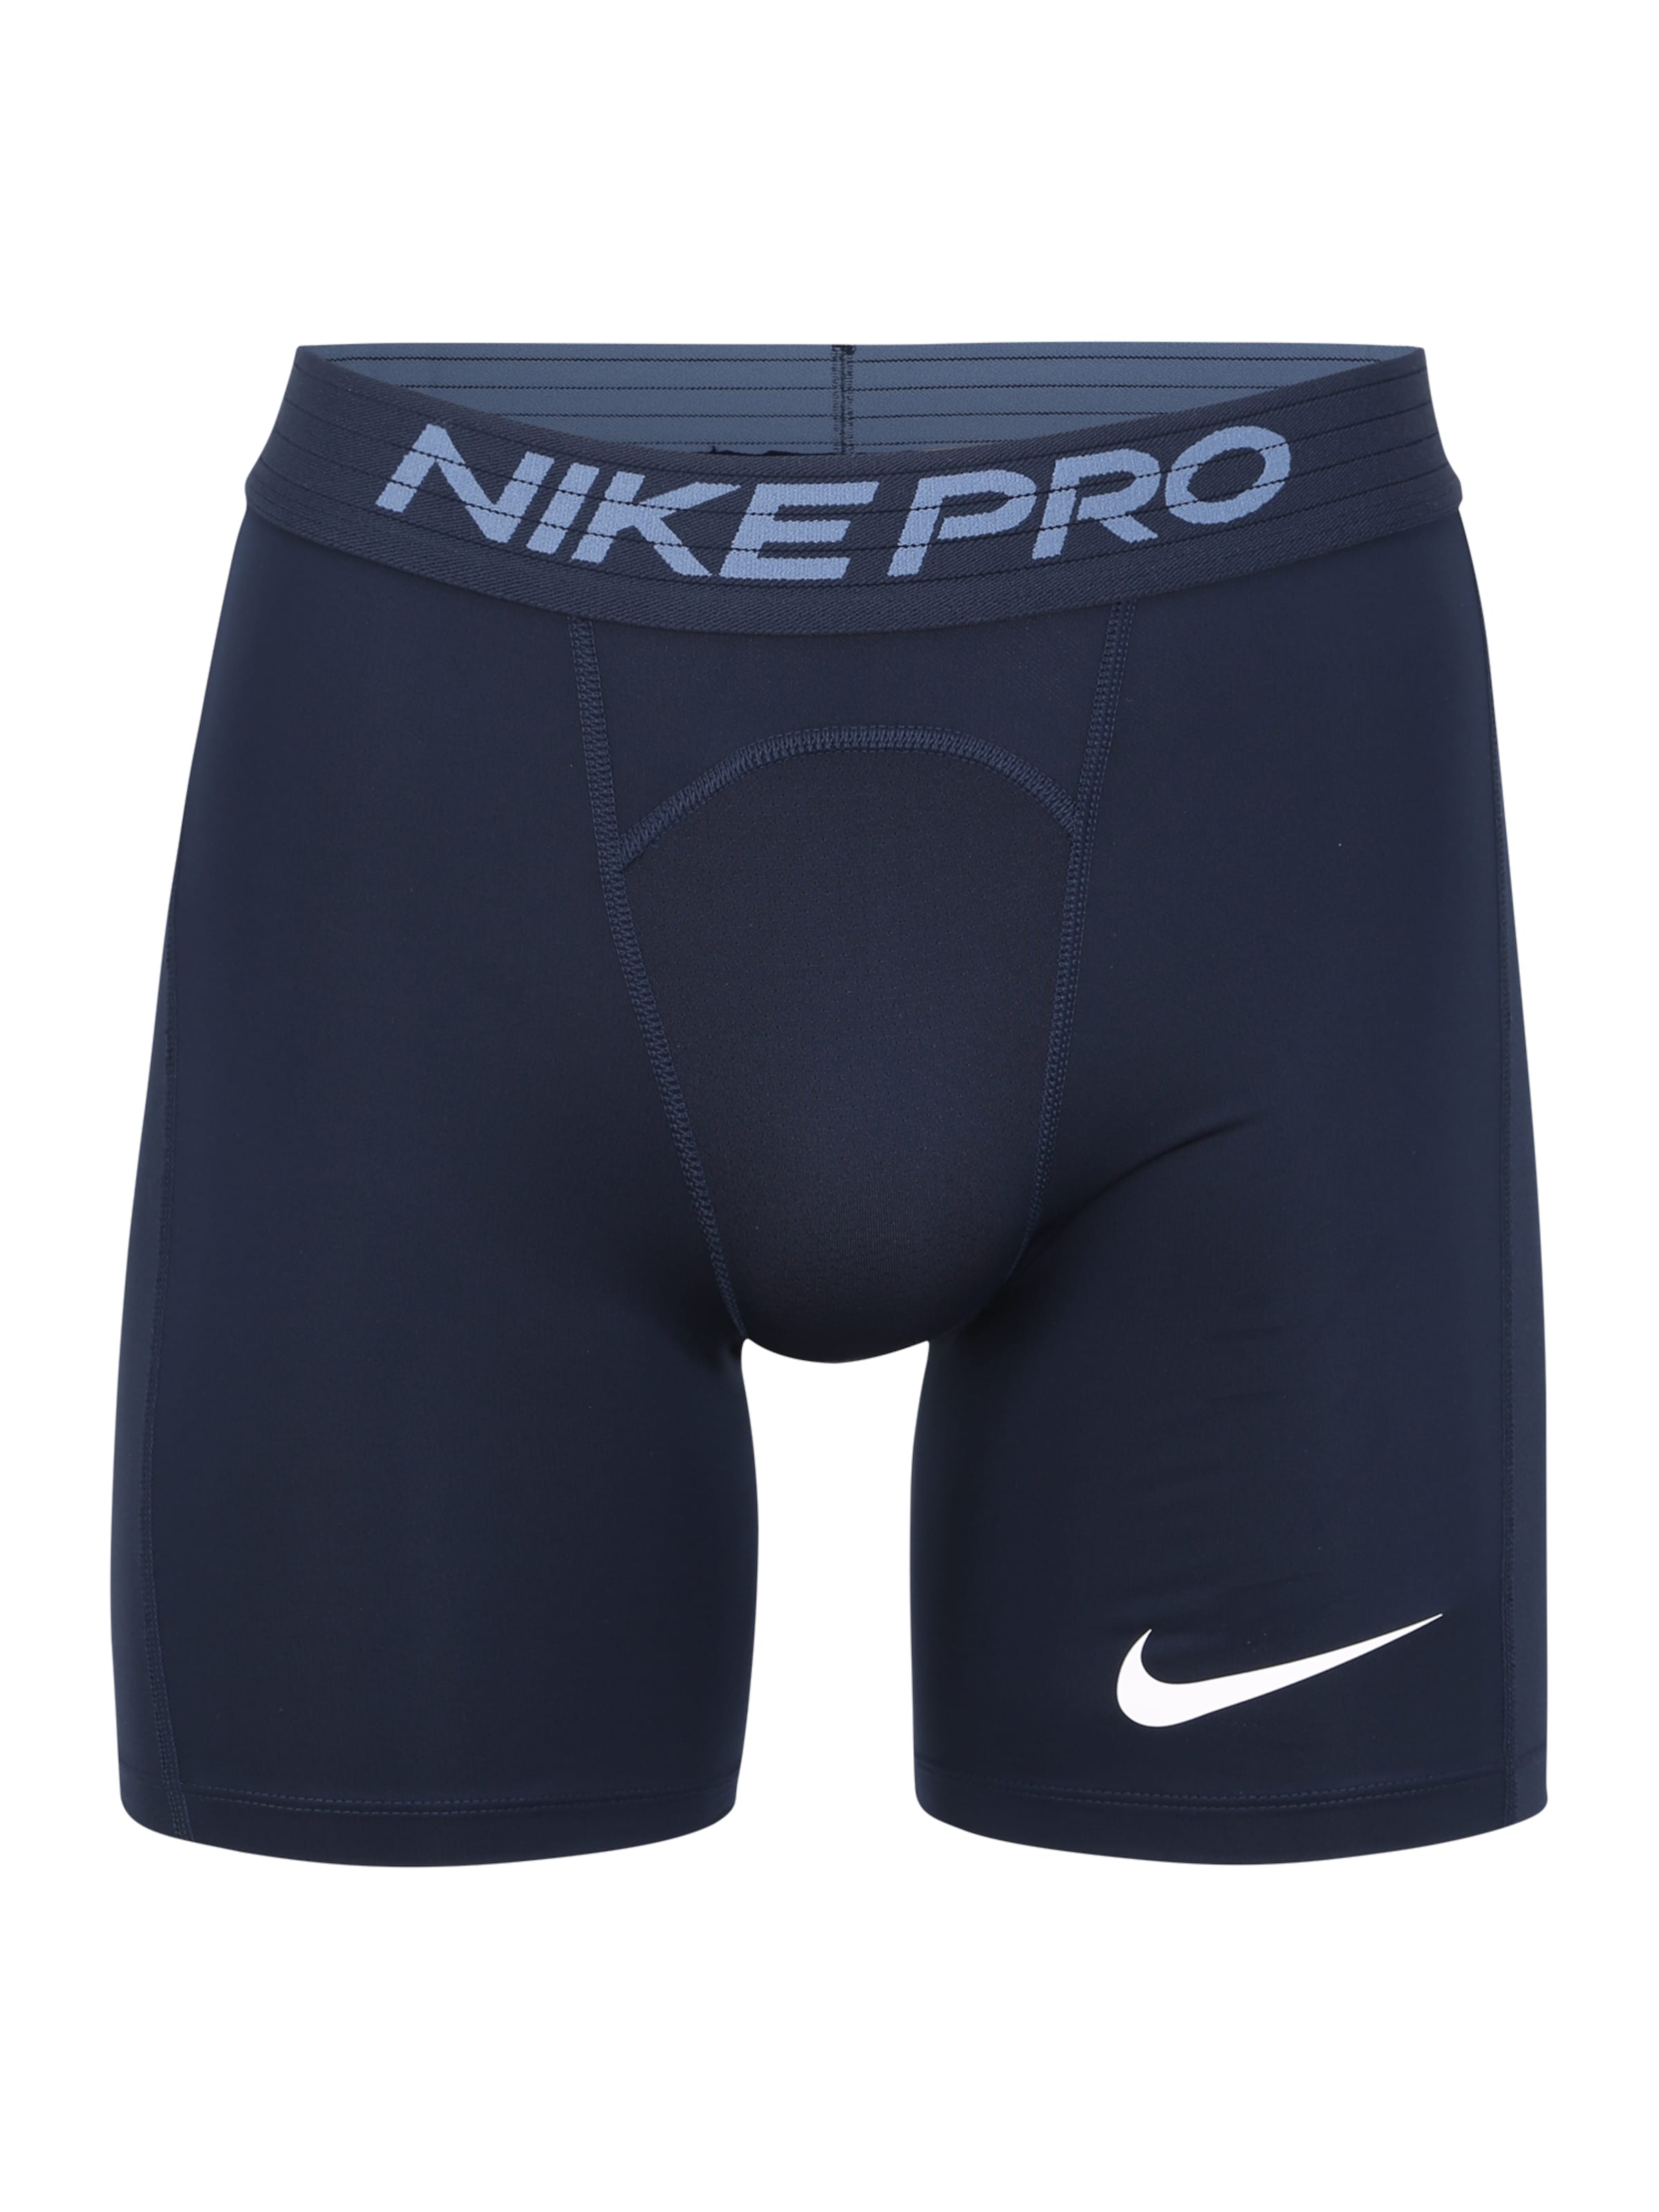 nike pro about you